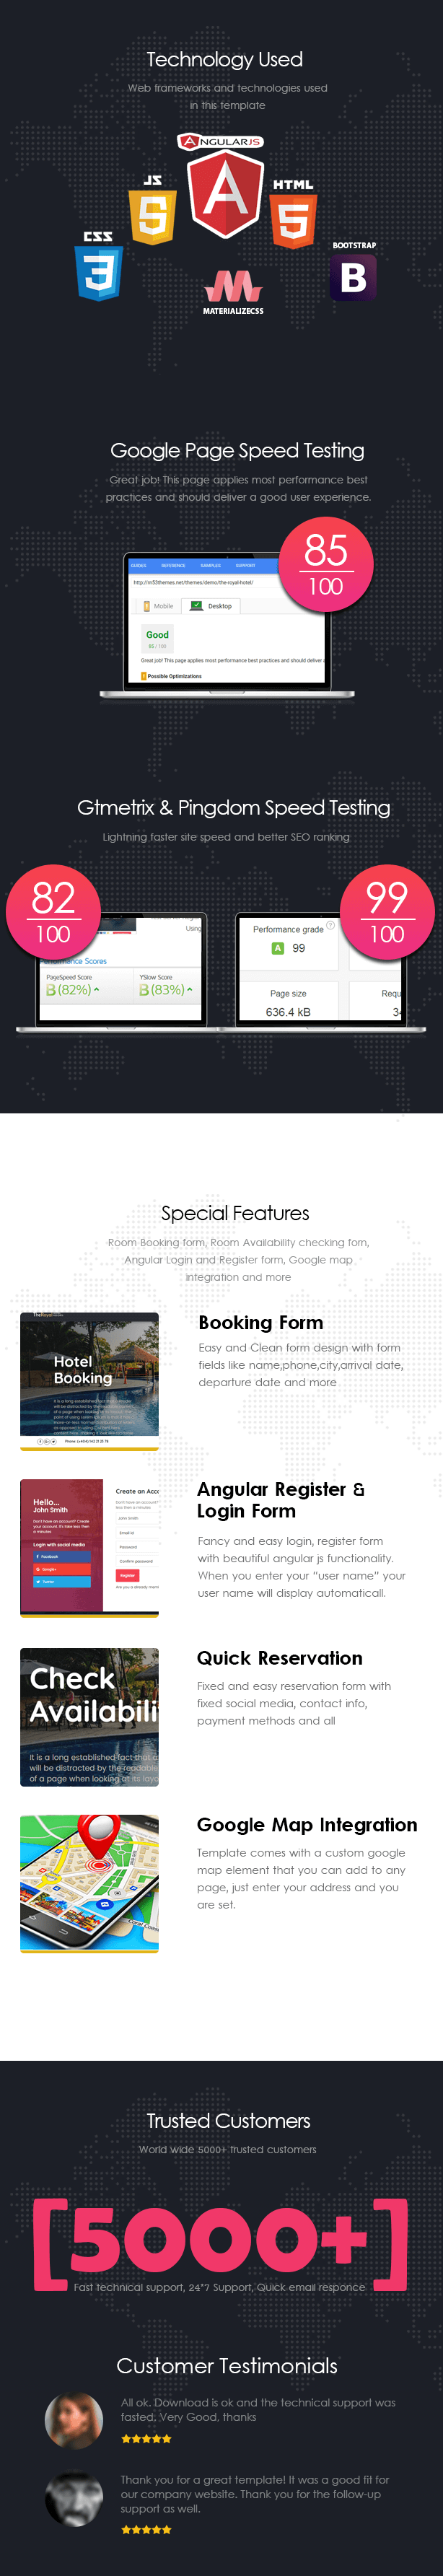 Hotel - Hotel Booking Template - 2